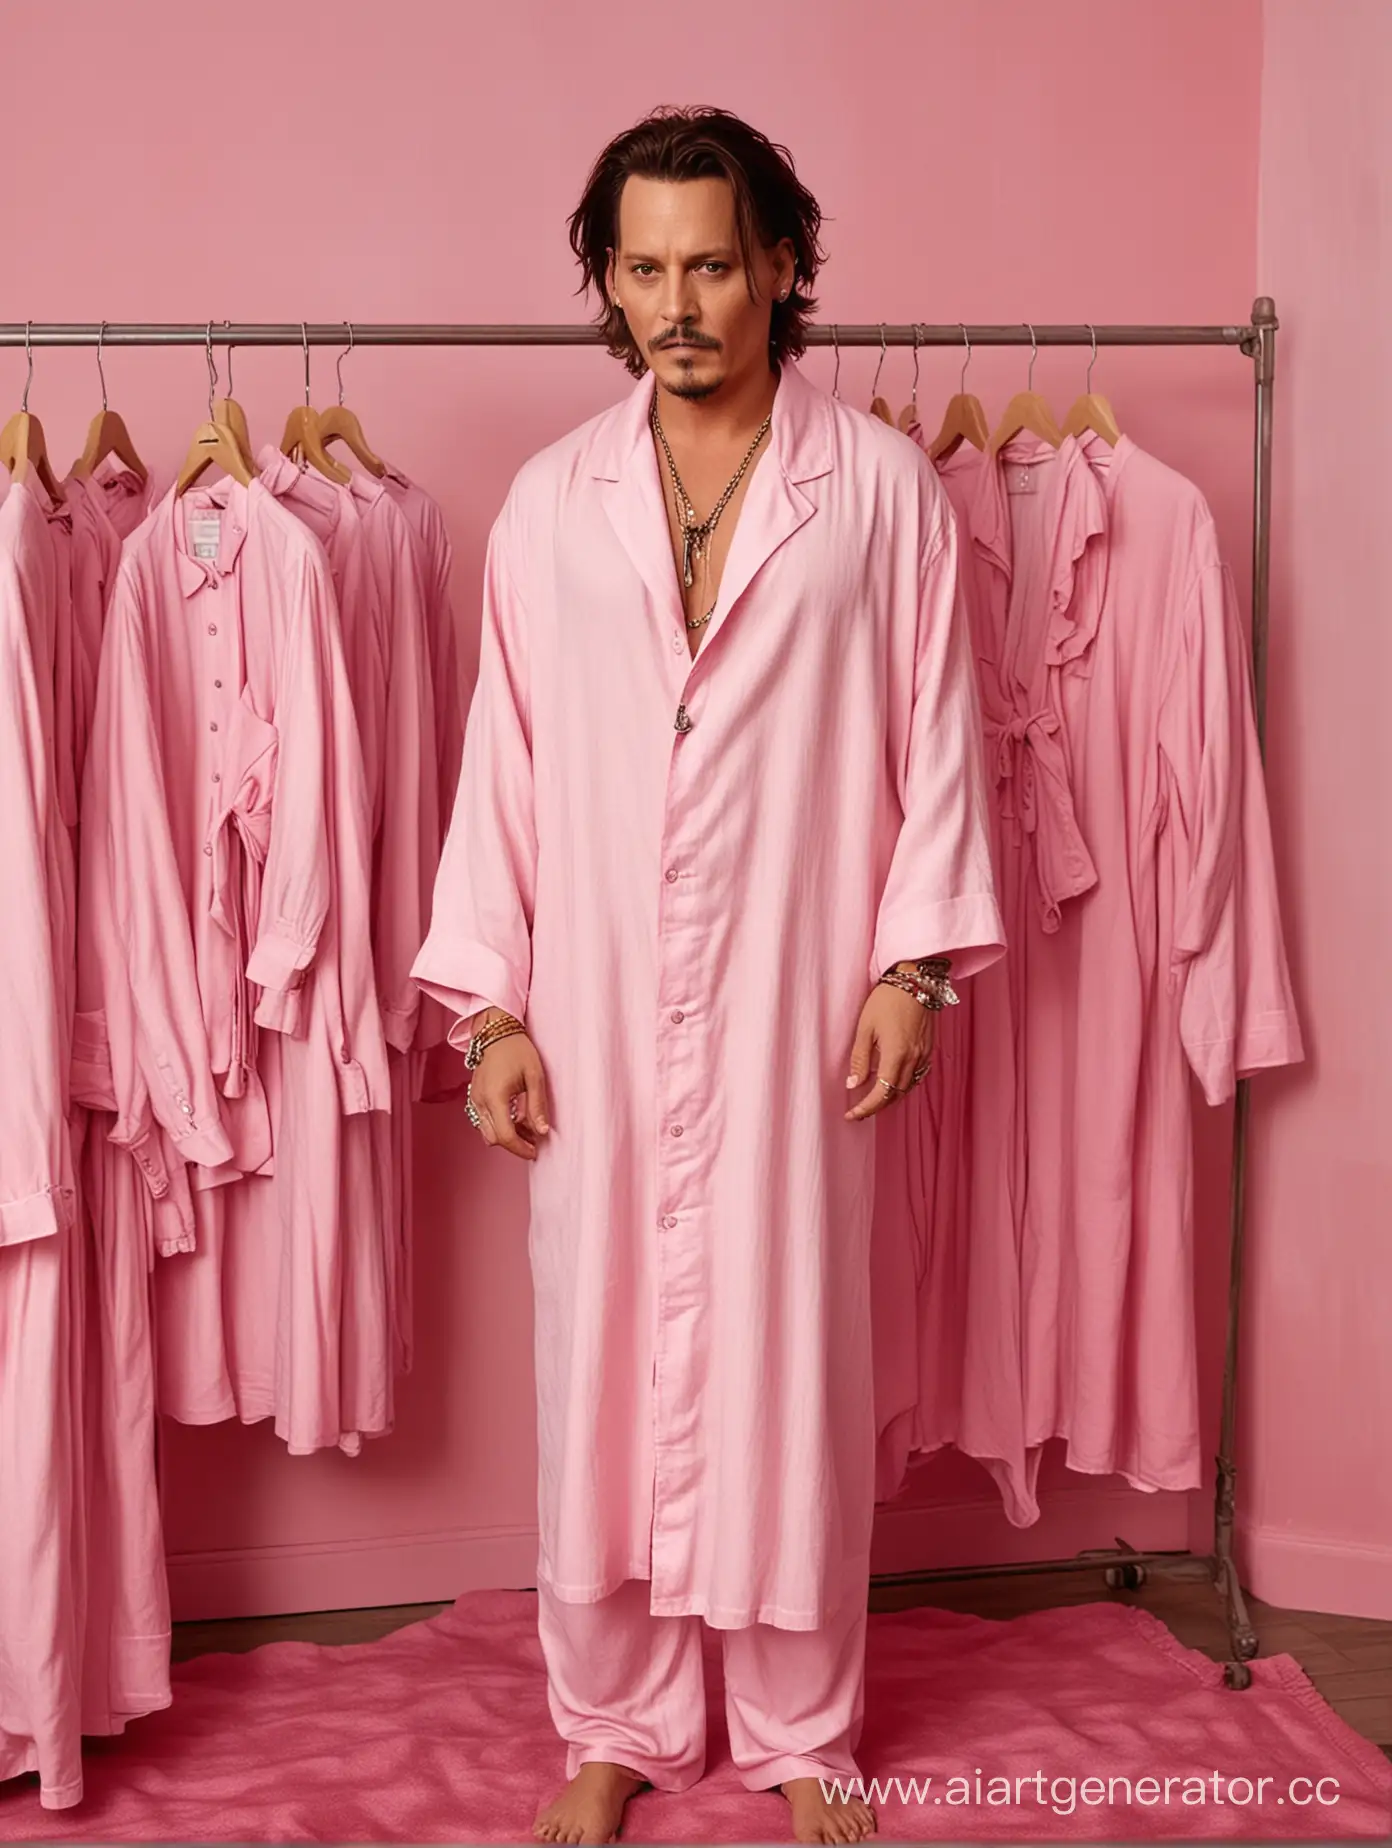 Johnny-Depp-Relaxing-in-a-Pink-Pajama-in-a-Cozy-Pink-Room-with-Linen-Abayas-Hanging-in-Wardrobe